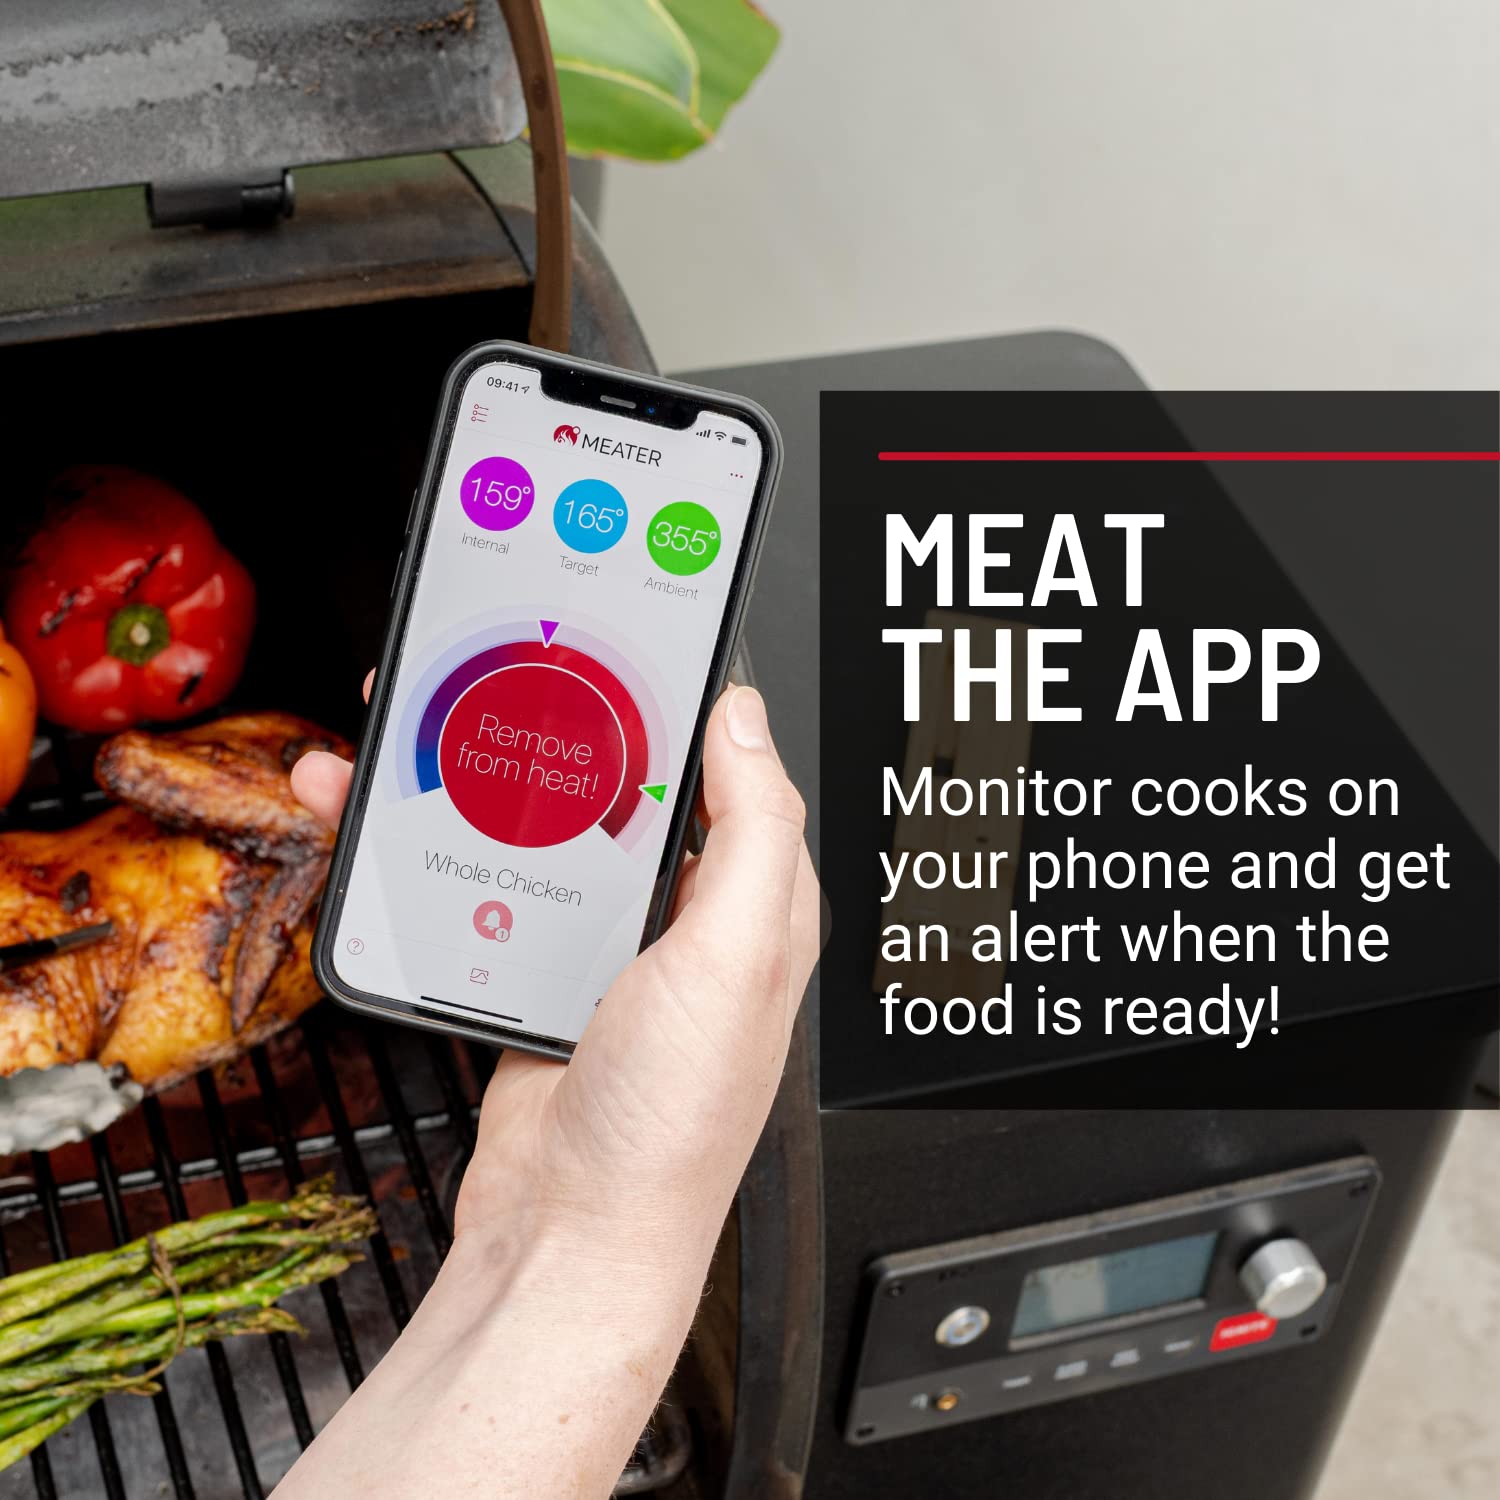 Original MEATER: Wireless Smart Meat Thermometer | 33ft Wireless Range | for The Oven, Grill, BBQ, Kitchen | iOS & Android App | Apple Watch, Alexa Compatible | Dishwasher Safe